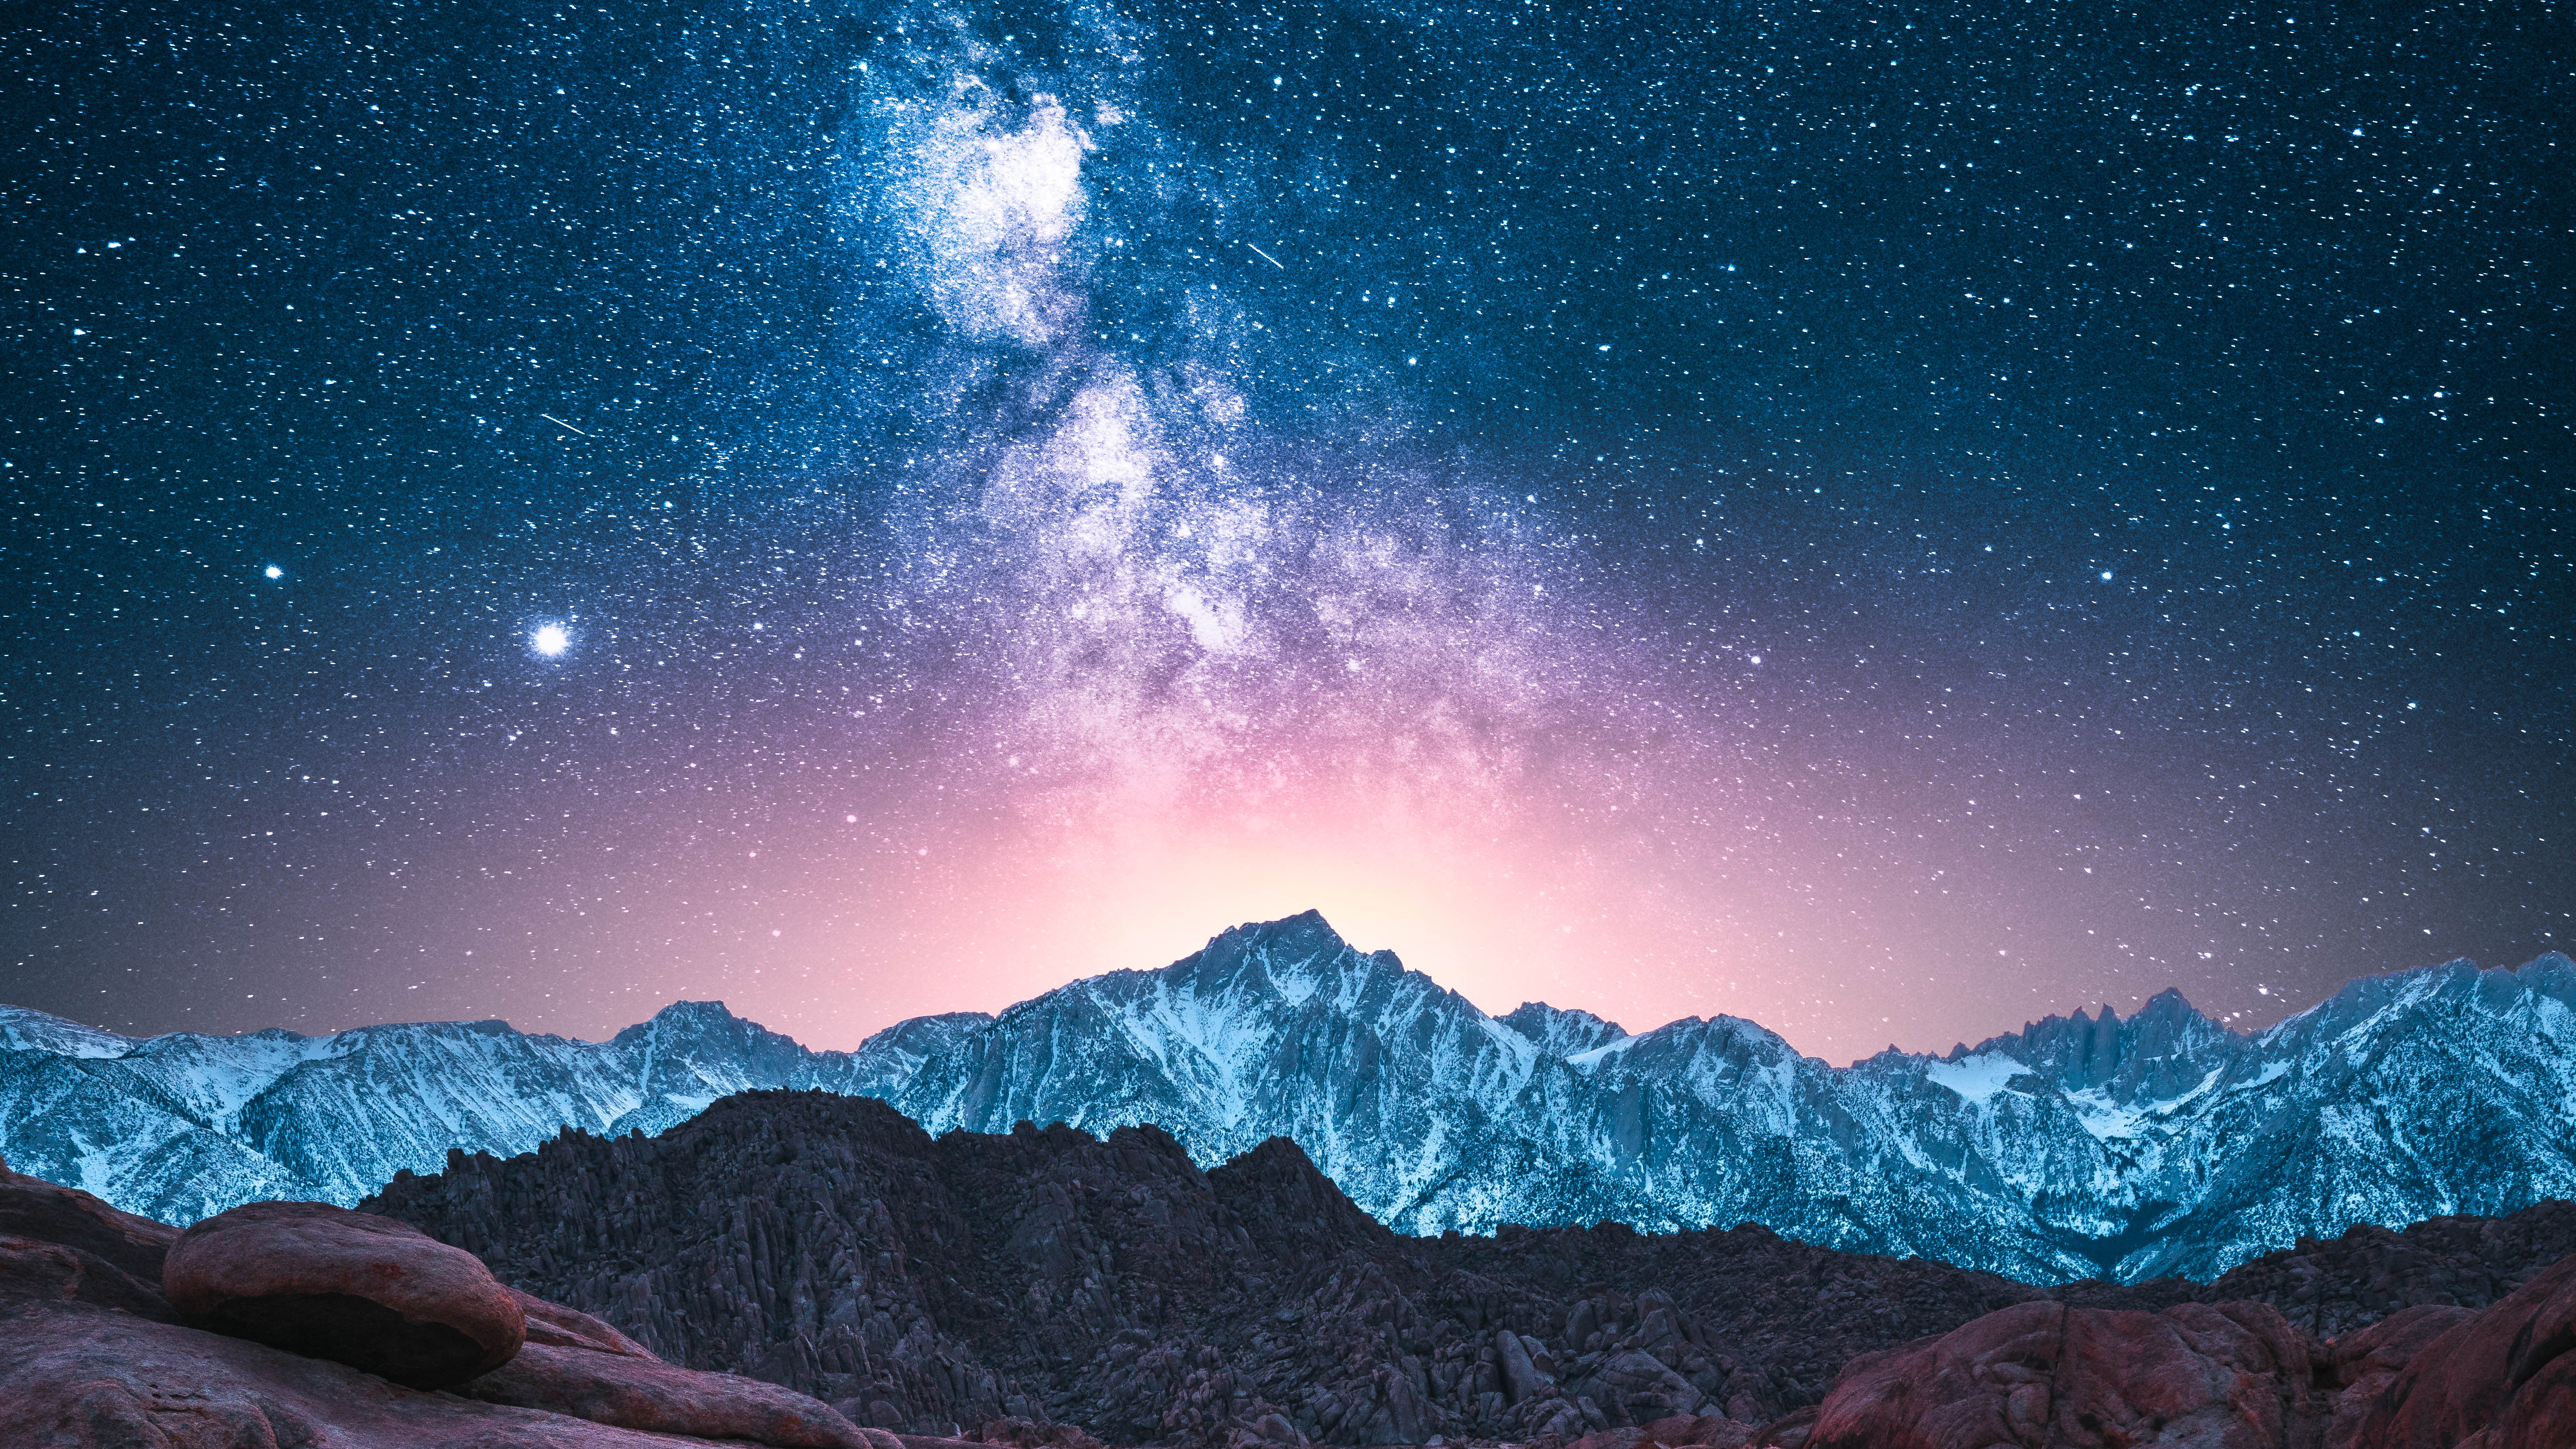 General 5120x2880 photography landscape mountains nature snow sunset stars Milky Way space shooting stars planet starry night